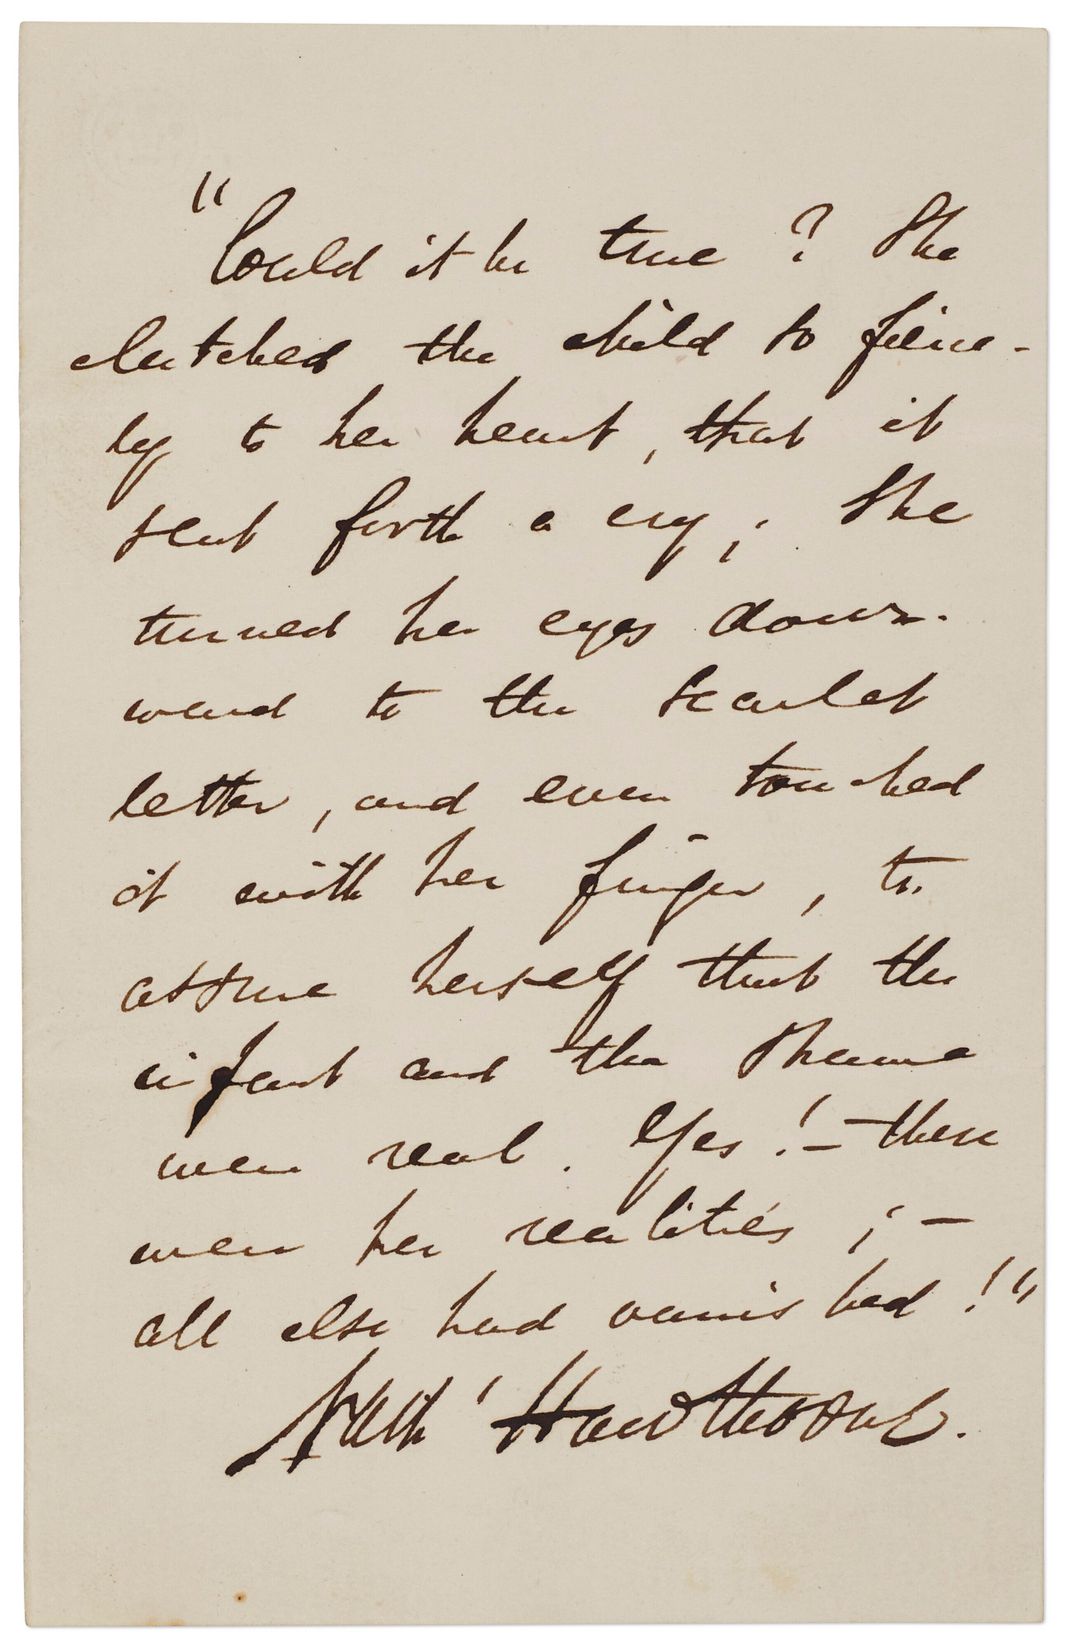 Page from the Hawthorne family copy of The Scarlet Letter, together with the only known autograph manuscript of any portion of the novel in private hands